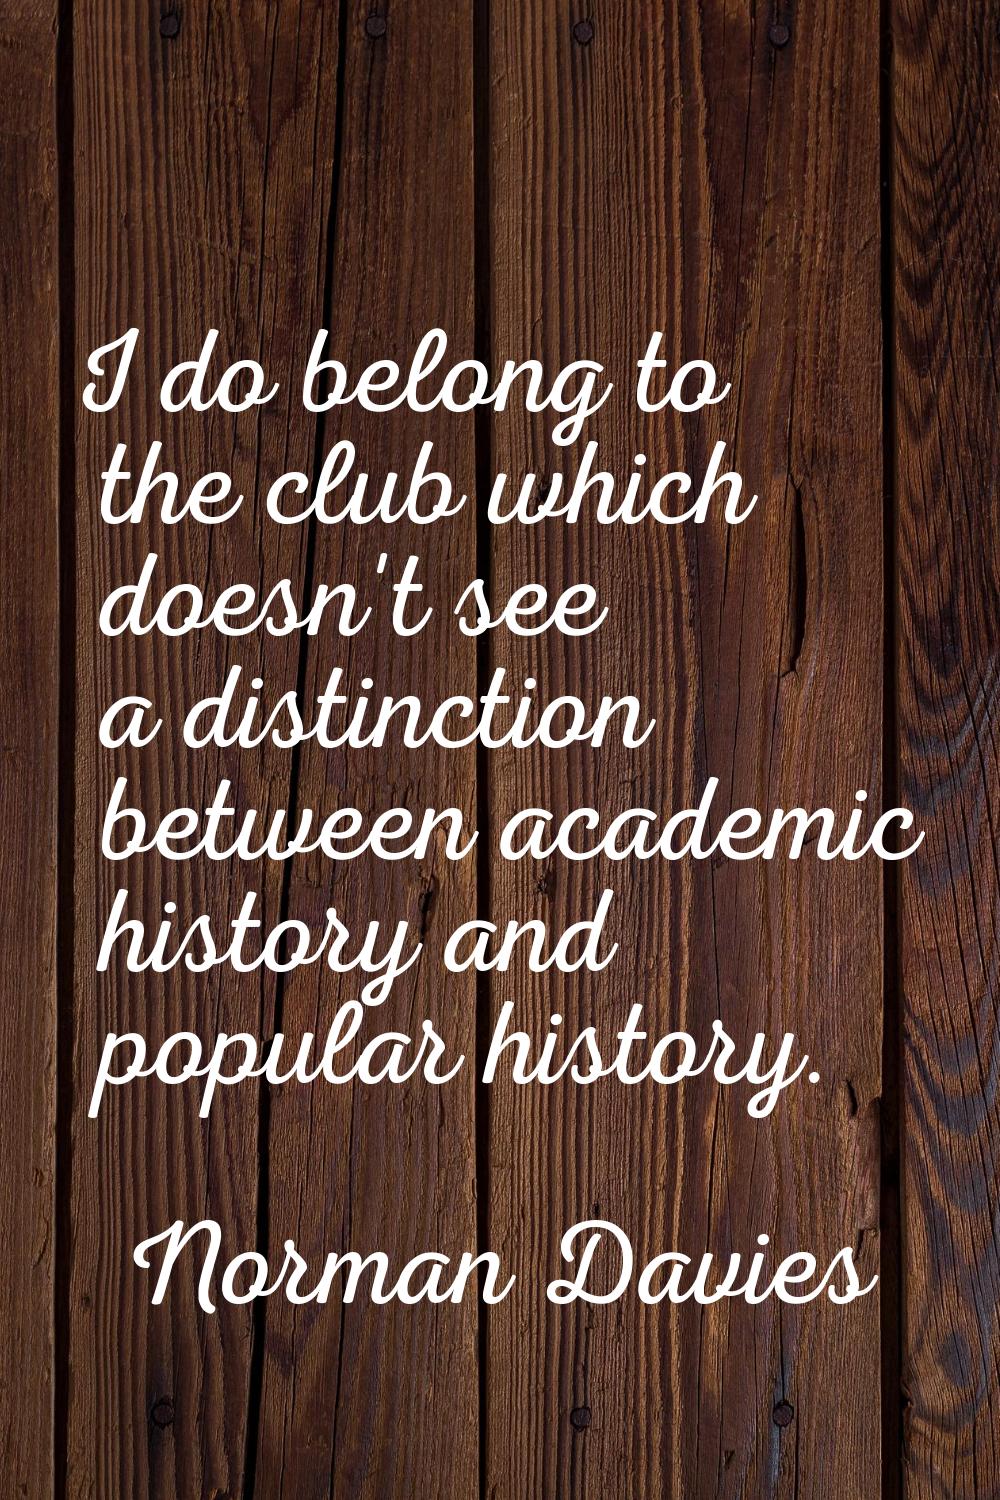 I do belong to the club which doesn't see a distinction between academic history and popular histor